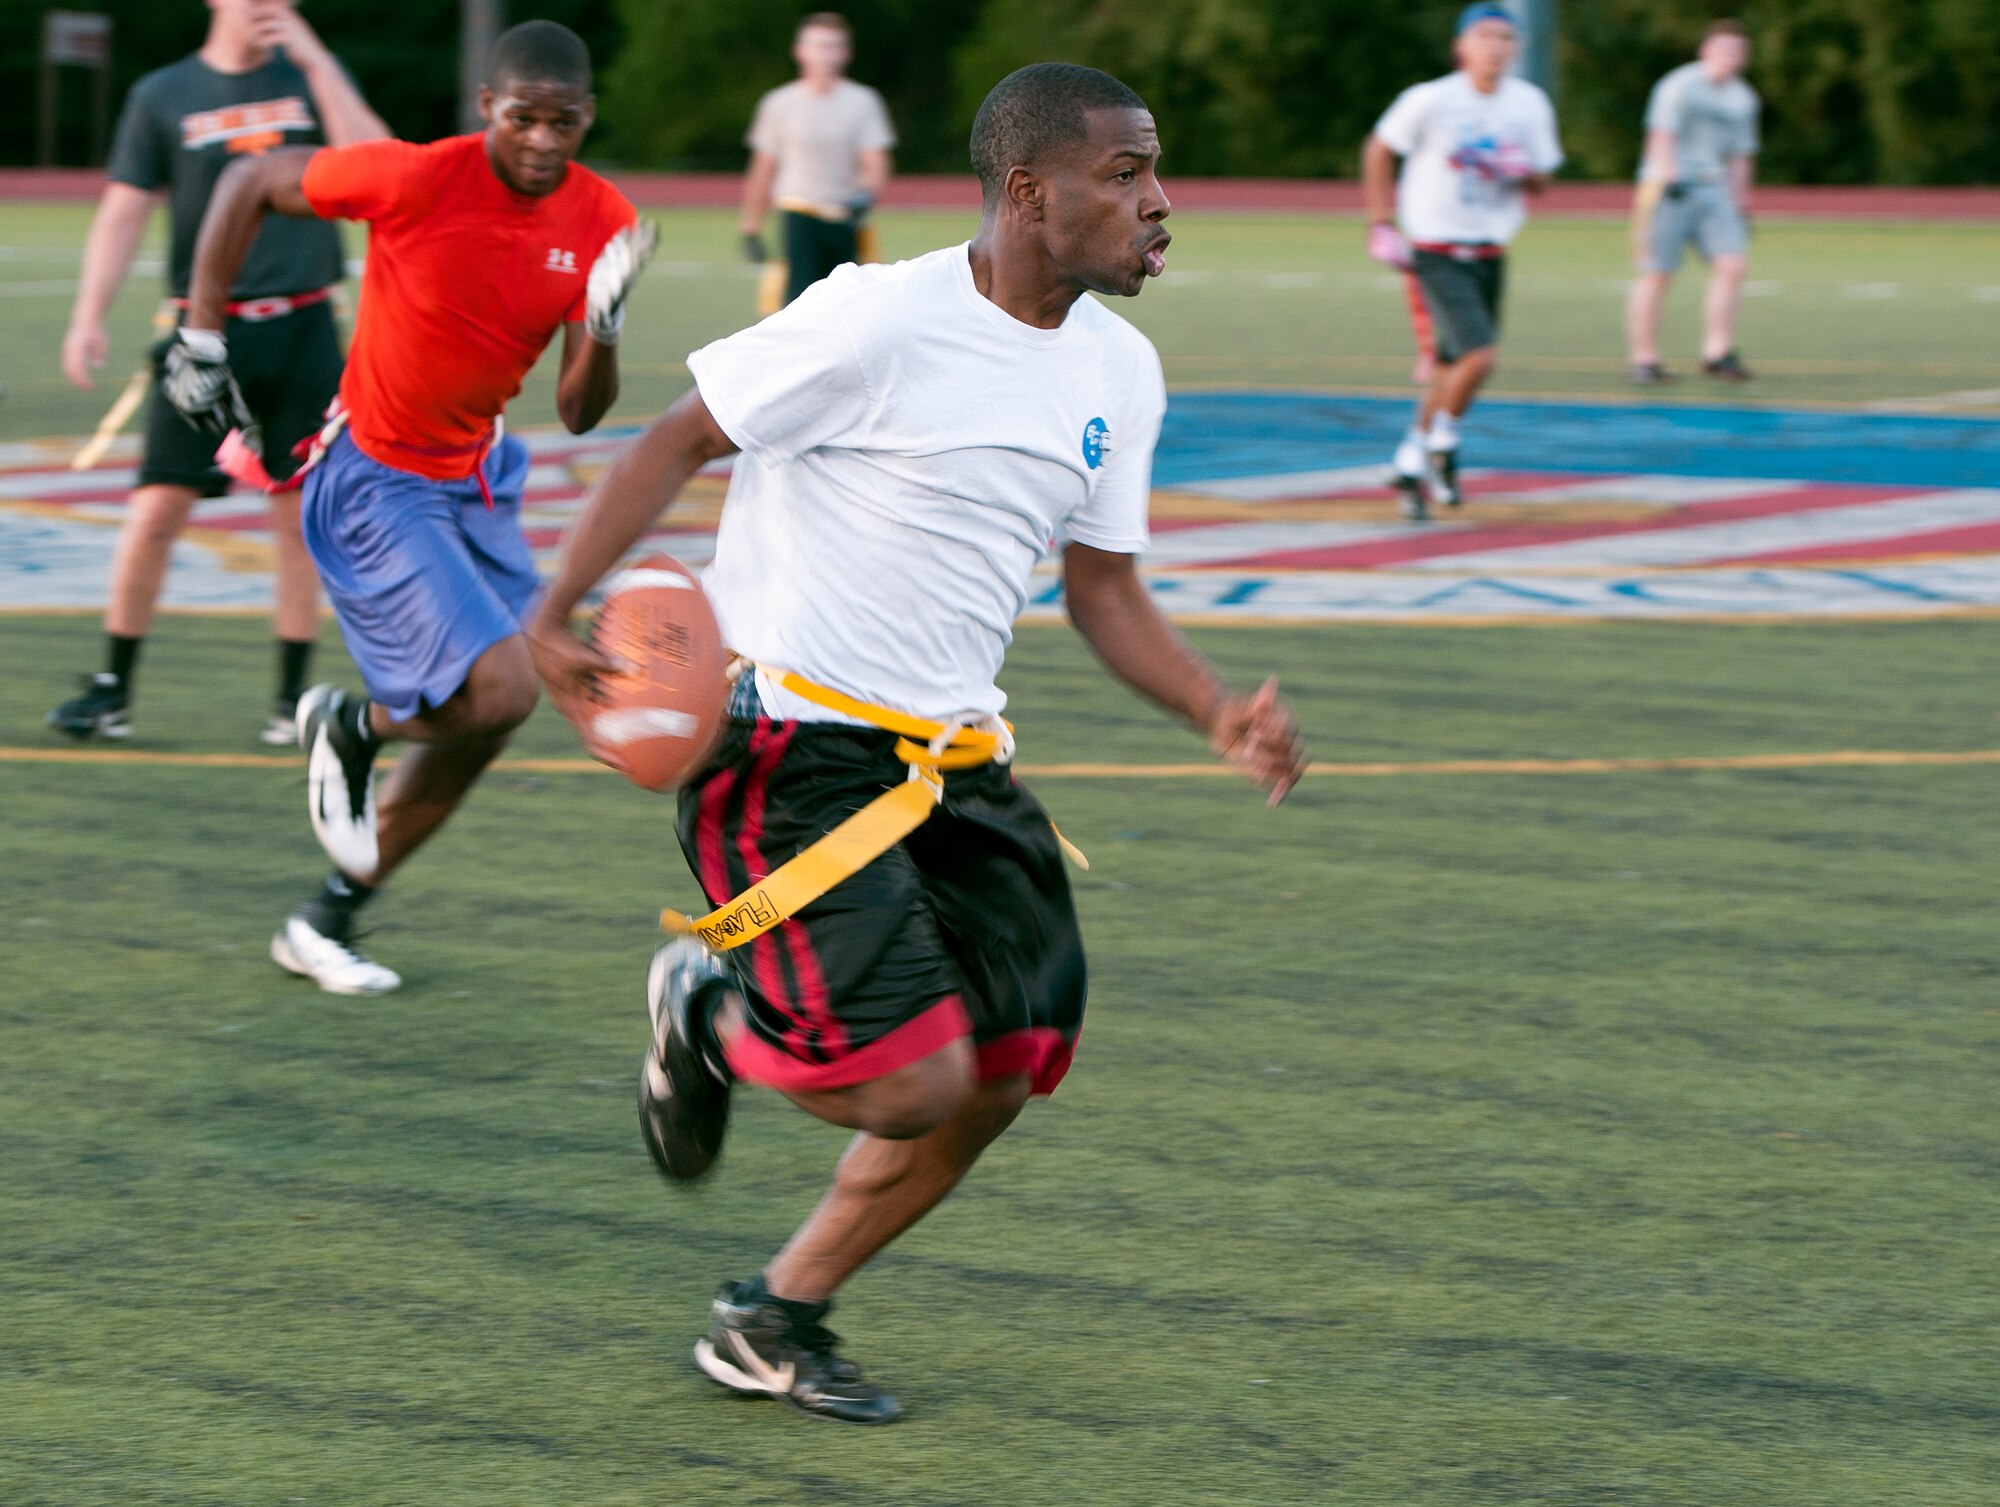 Al Sapp, 1st Special Operations Force Support Squadron wide receiver, attempts to outrun defenders during an intramural flag football game on Hurlburt Field, Fla., Oct. 21, 2014. The two teams ended the second half with a tie score of 24-24, which resulted in overtime play. (U.S. Air Force photo/Senior Airman Kentavist P. Brackin)